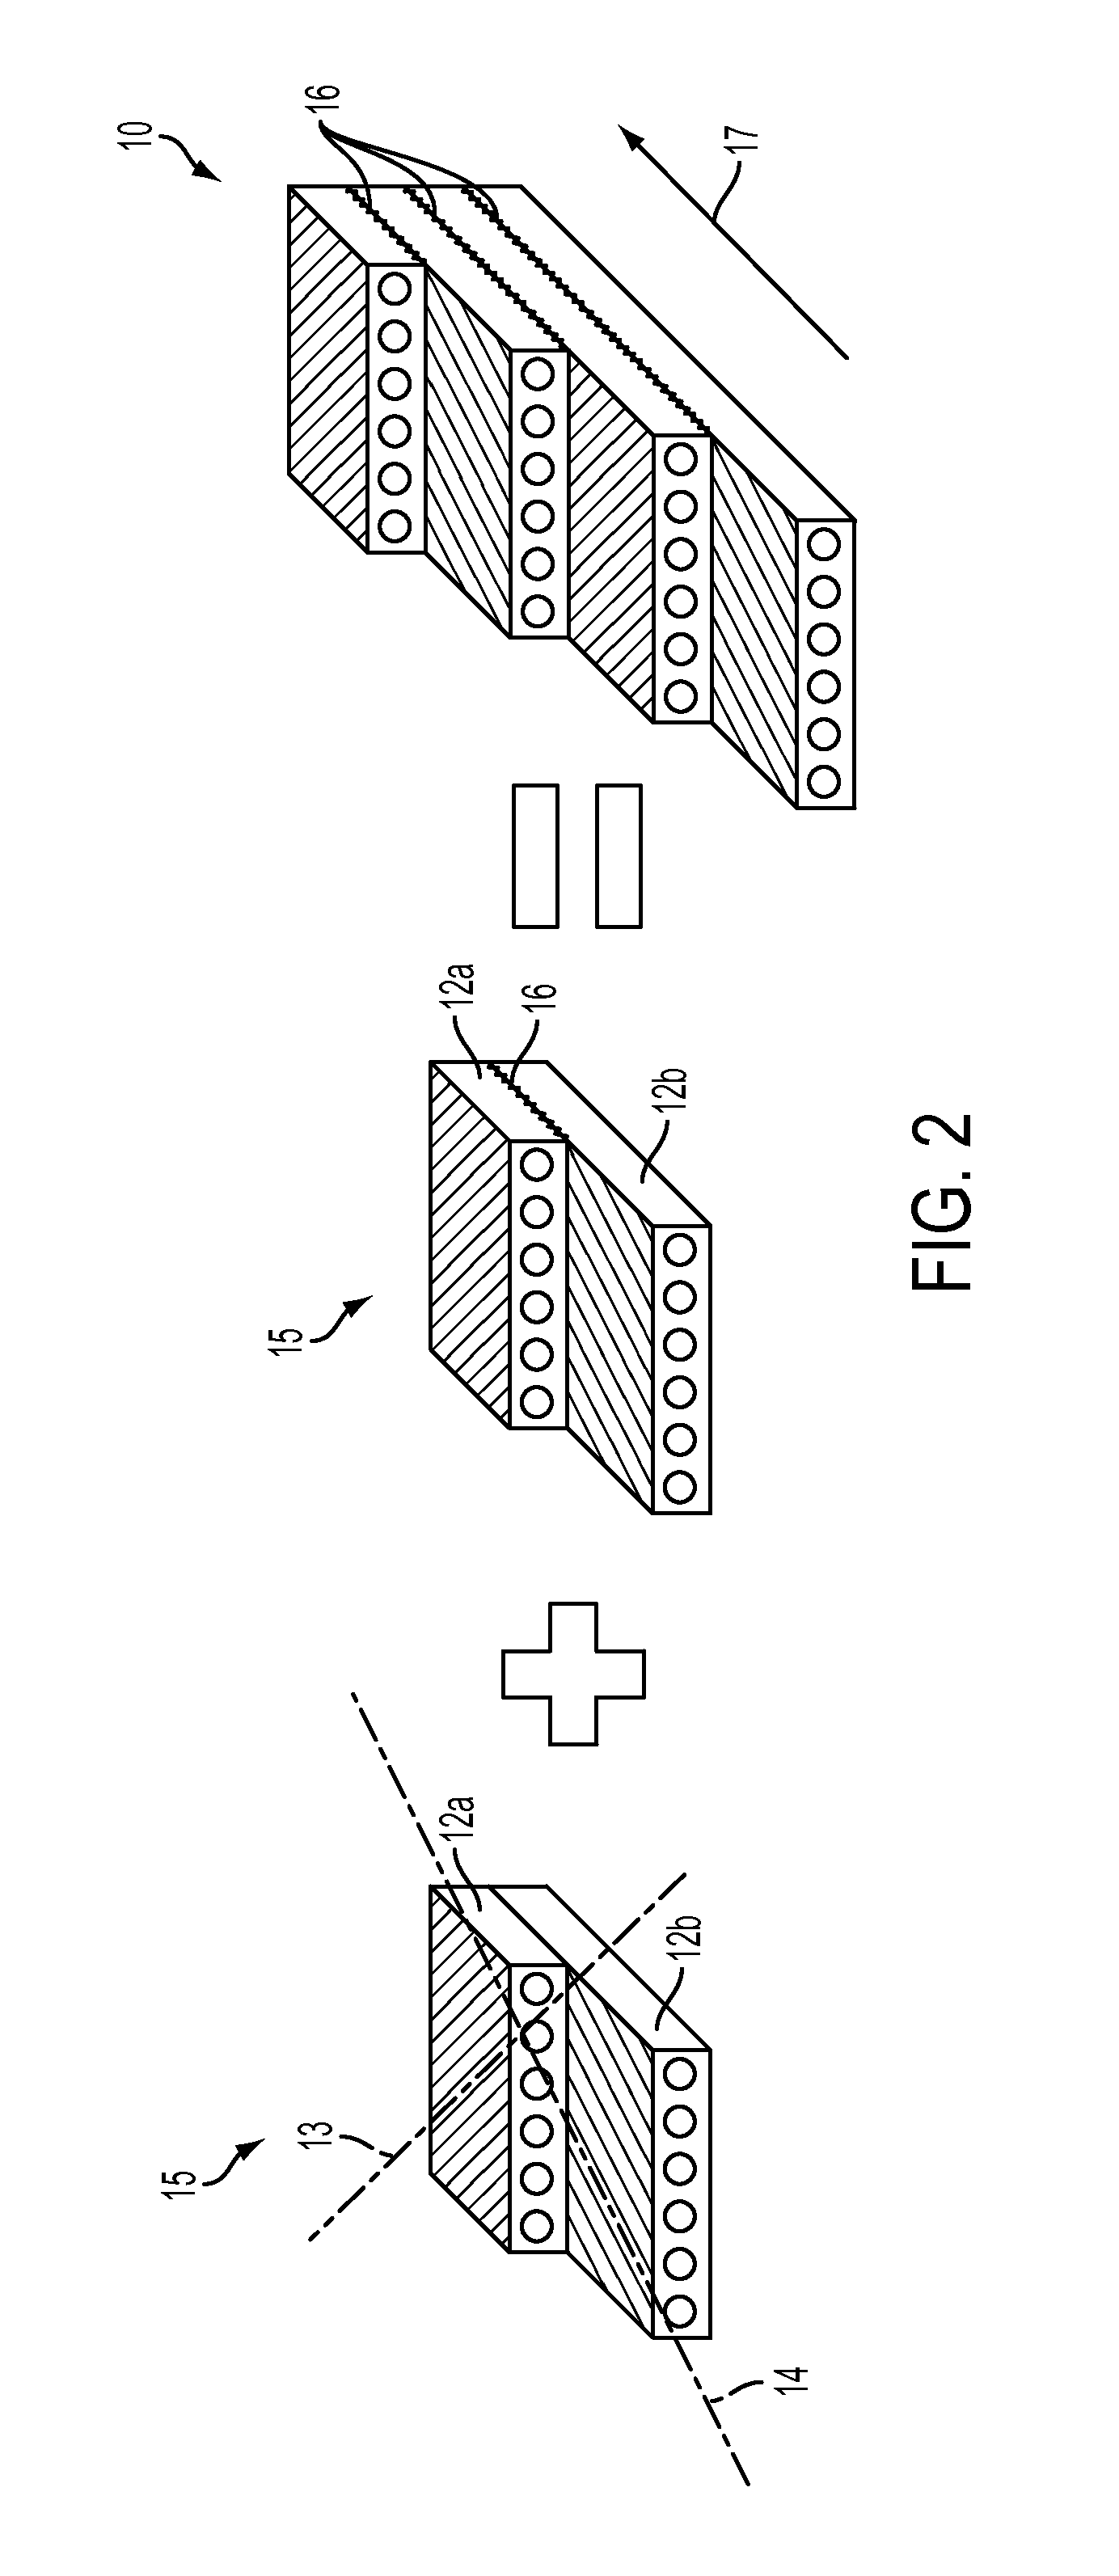 Composite bi-angle and thin-ply laminate tapes and methods for manufacturing and using the same